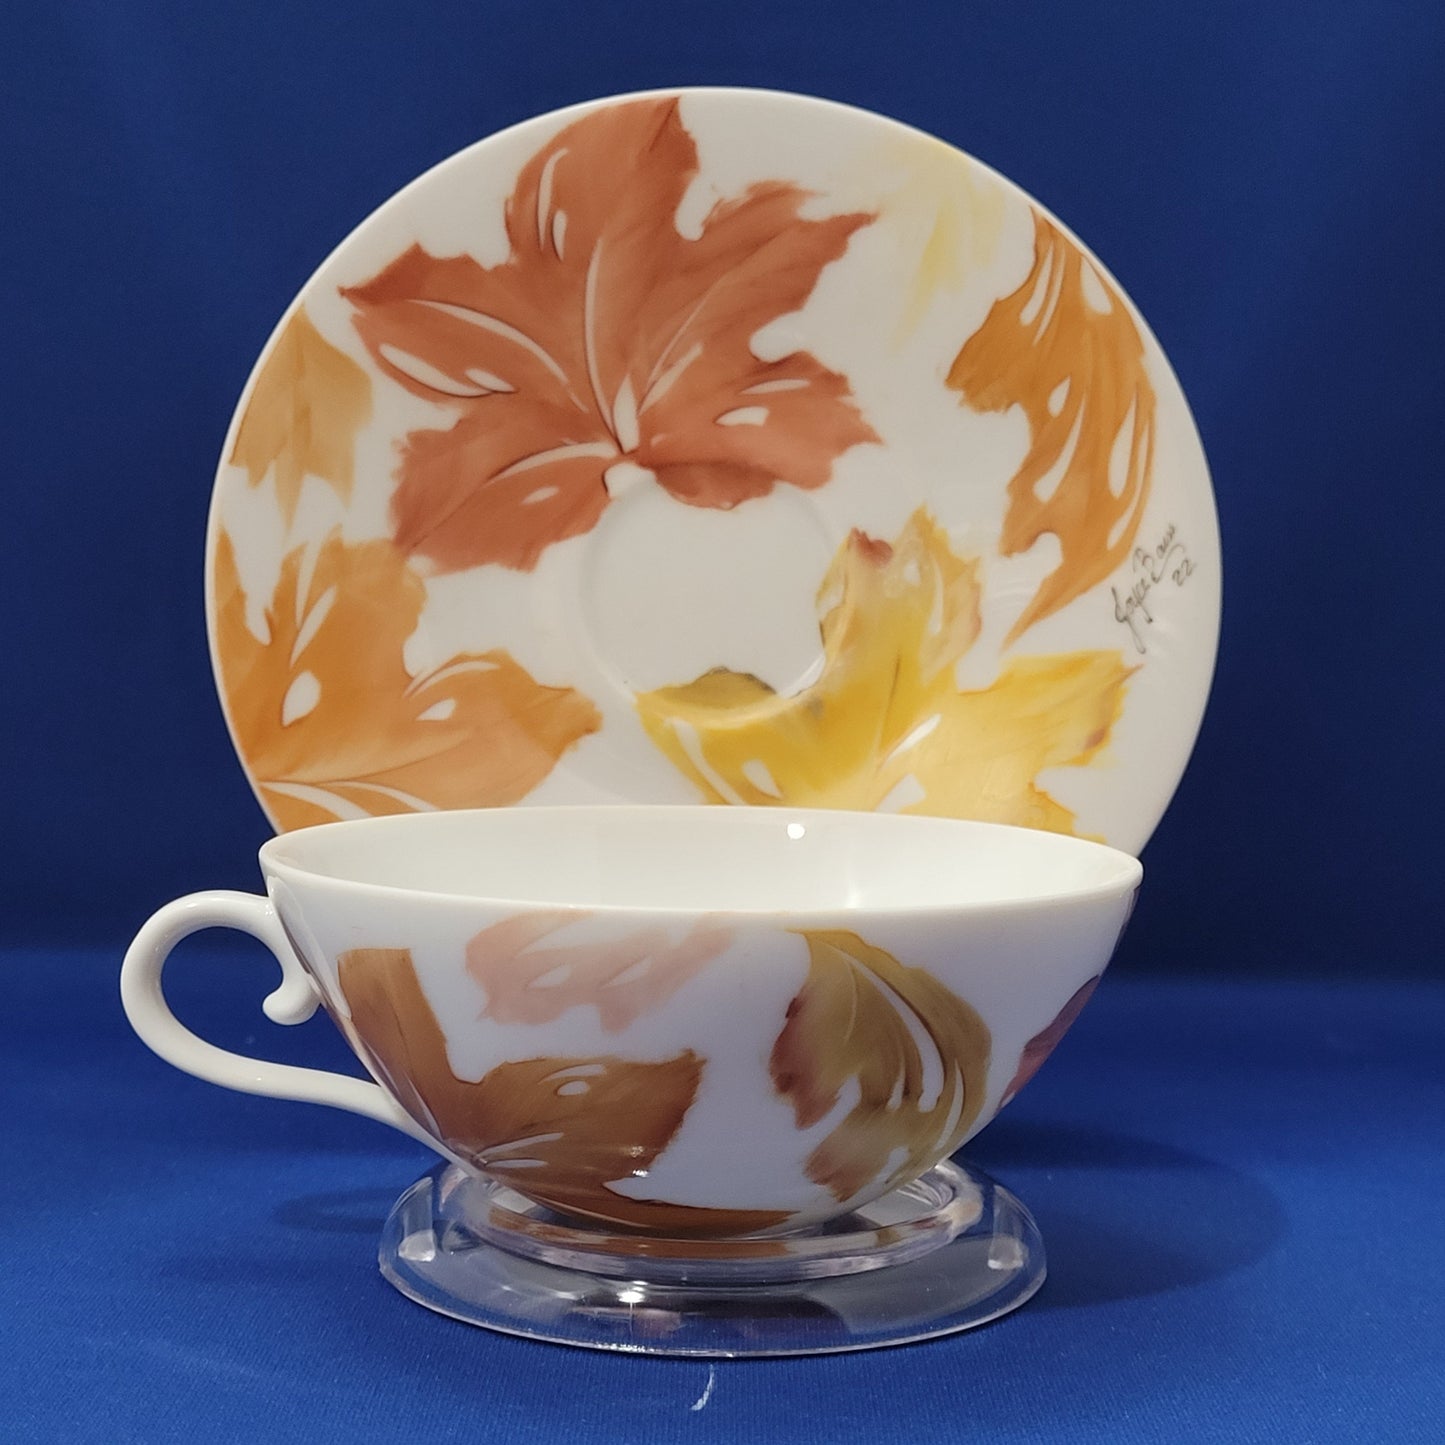 Cup and Tea Cups with Fall design set A